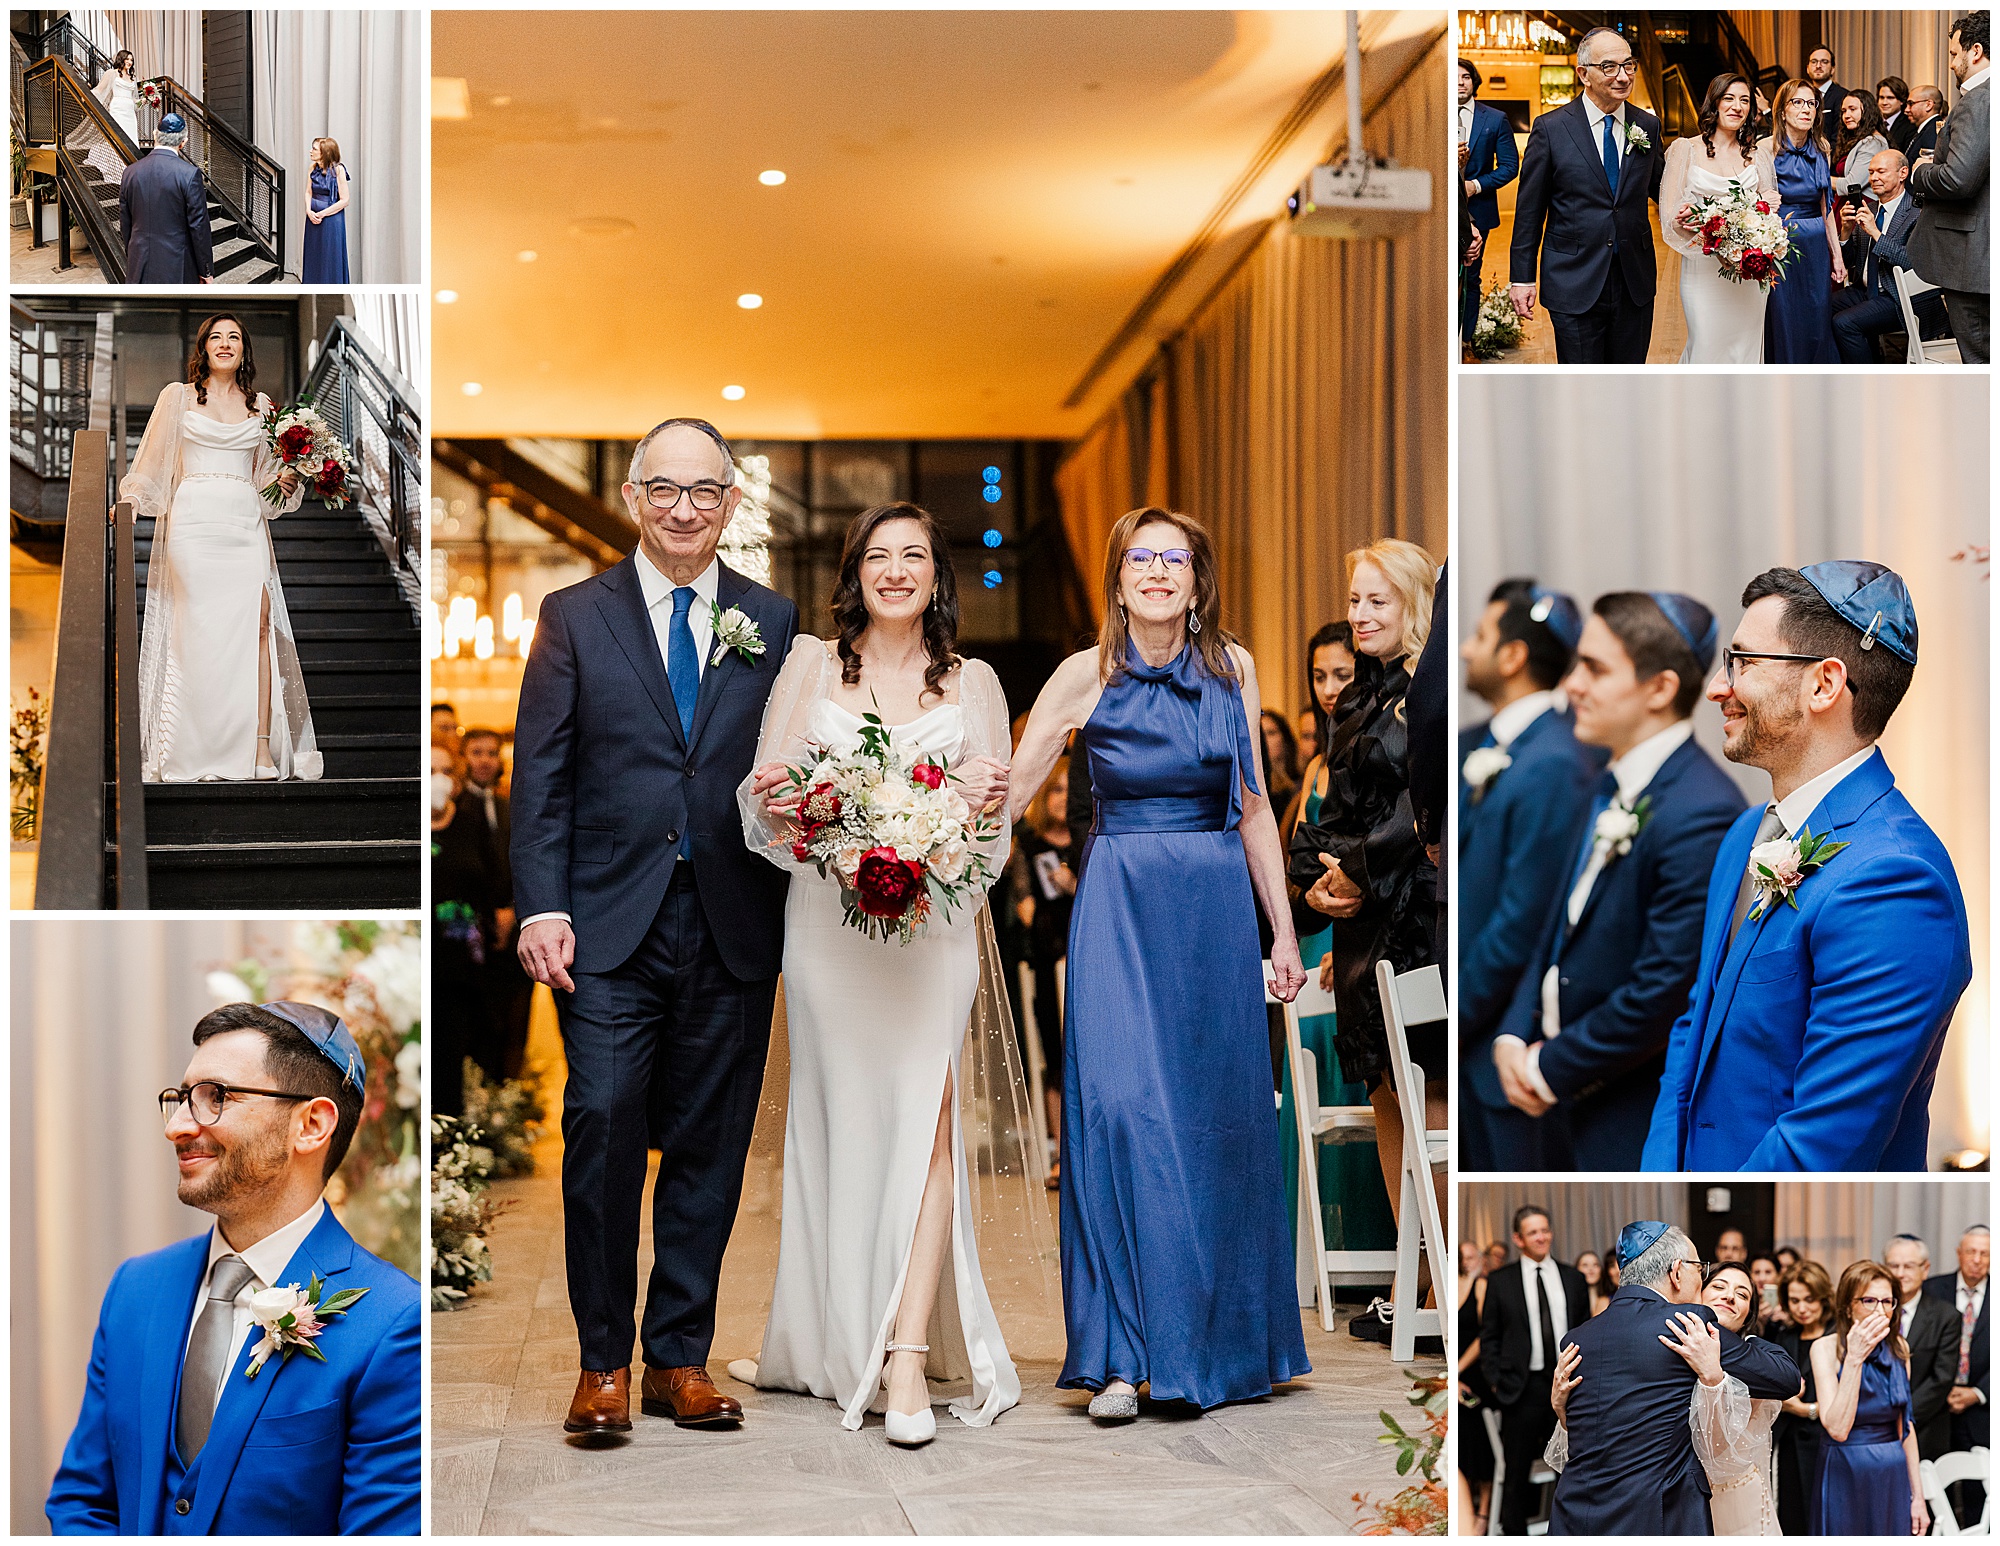 Perfect winter wedding at the ravel hotel